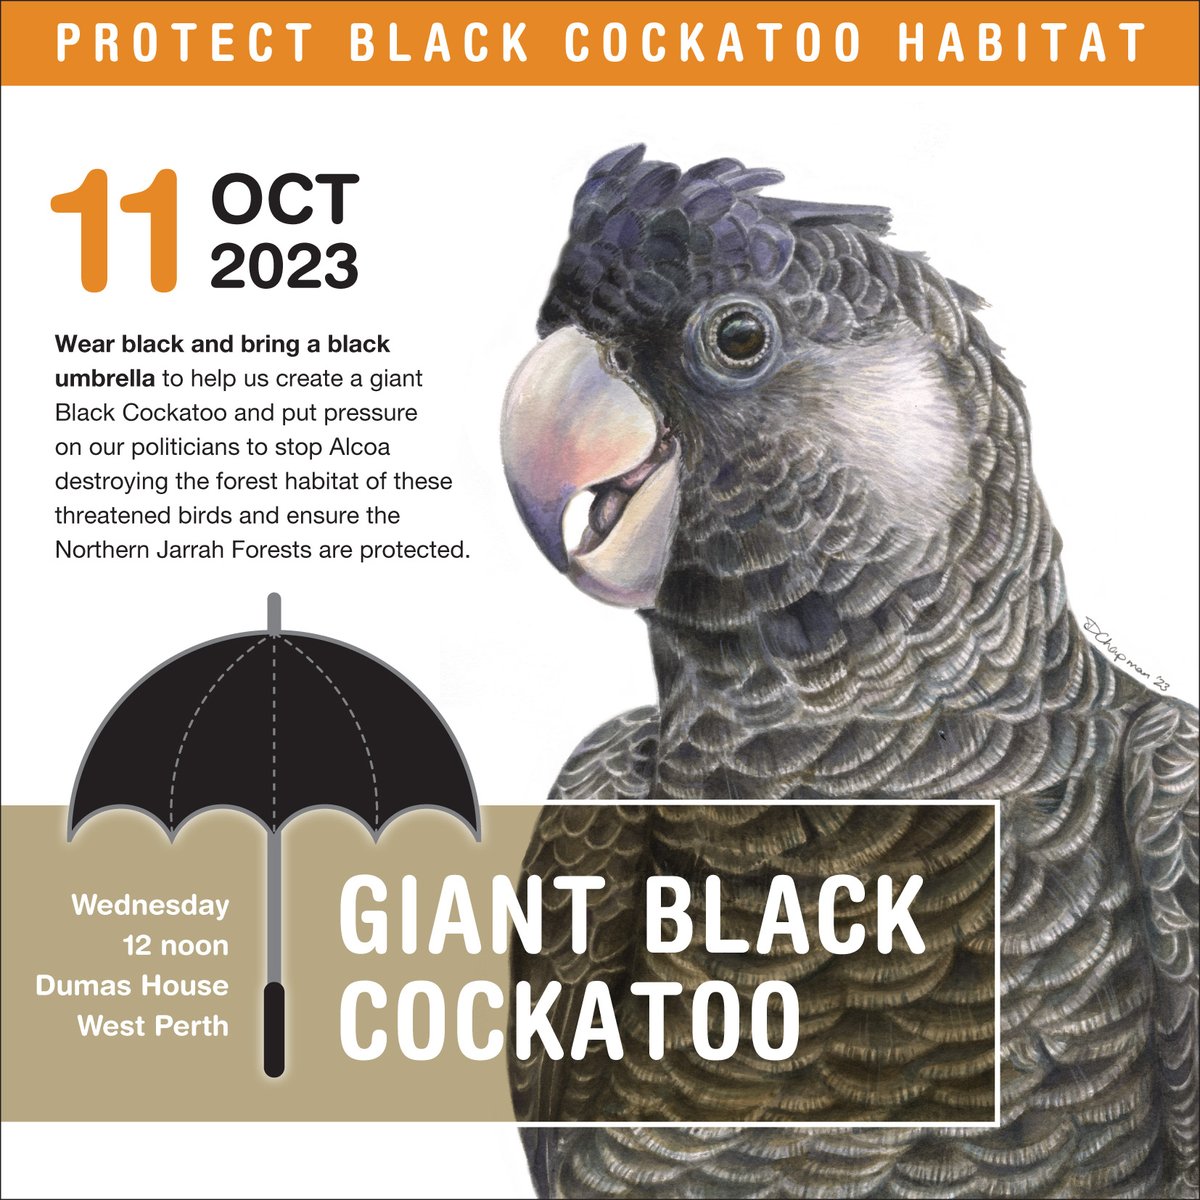 Join us 11 Oct at 12pm, to make a giant black cockatoo. Wear black and bring a black umbrella to help us put pressure on our politicians to stop #Alcoa destroying the forest habitat of these threatened birds. Register here: actionnetwork.org/events/giant-b… @savecockatoos @hearyanow